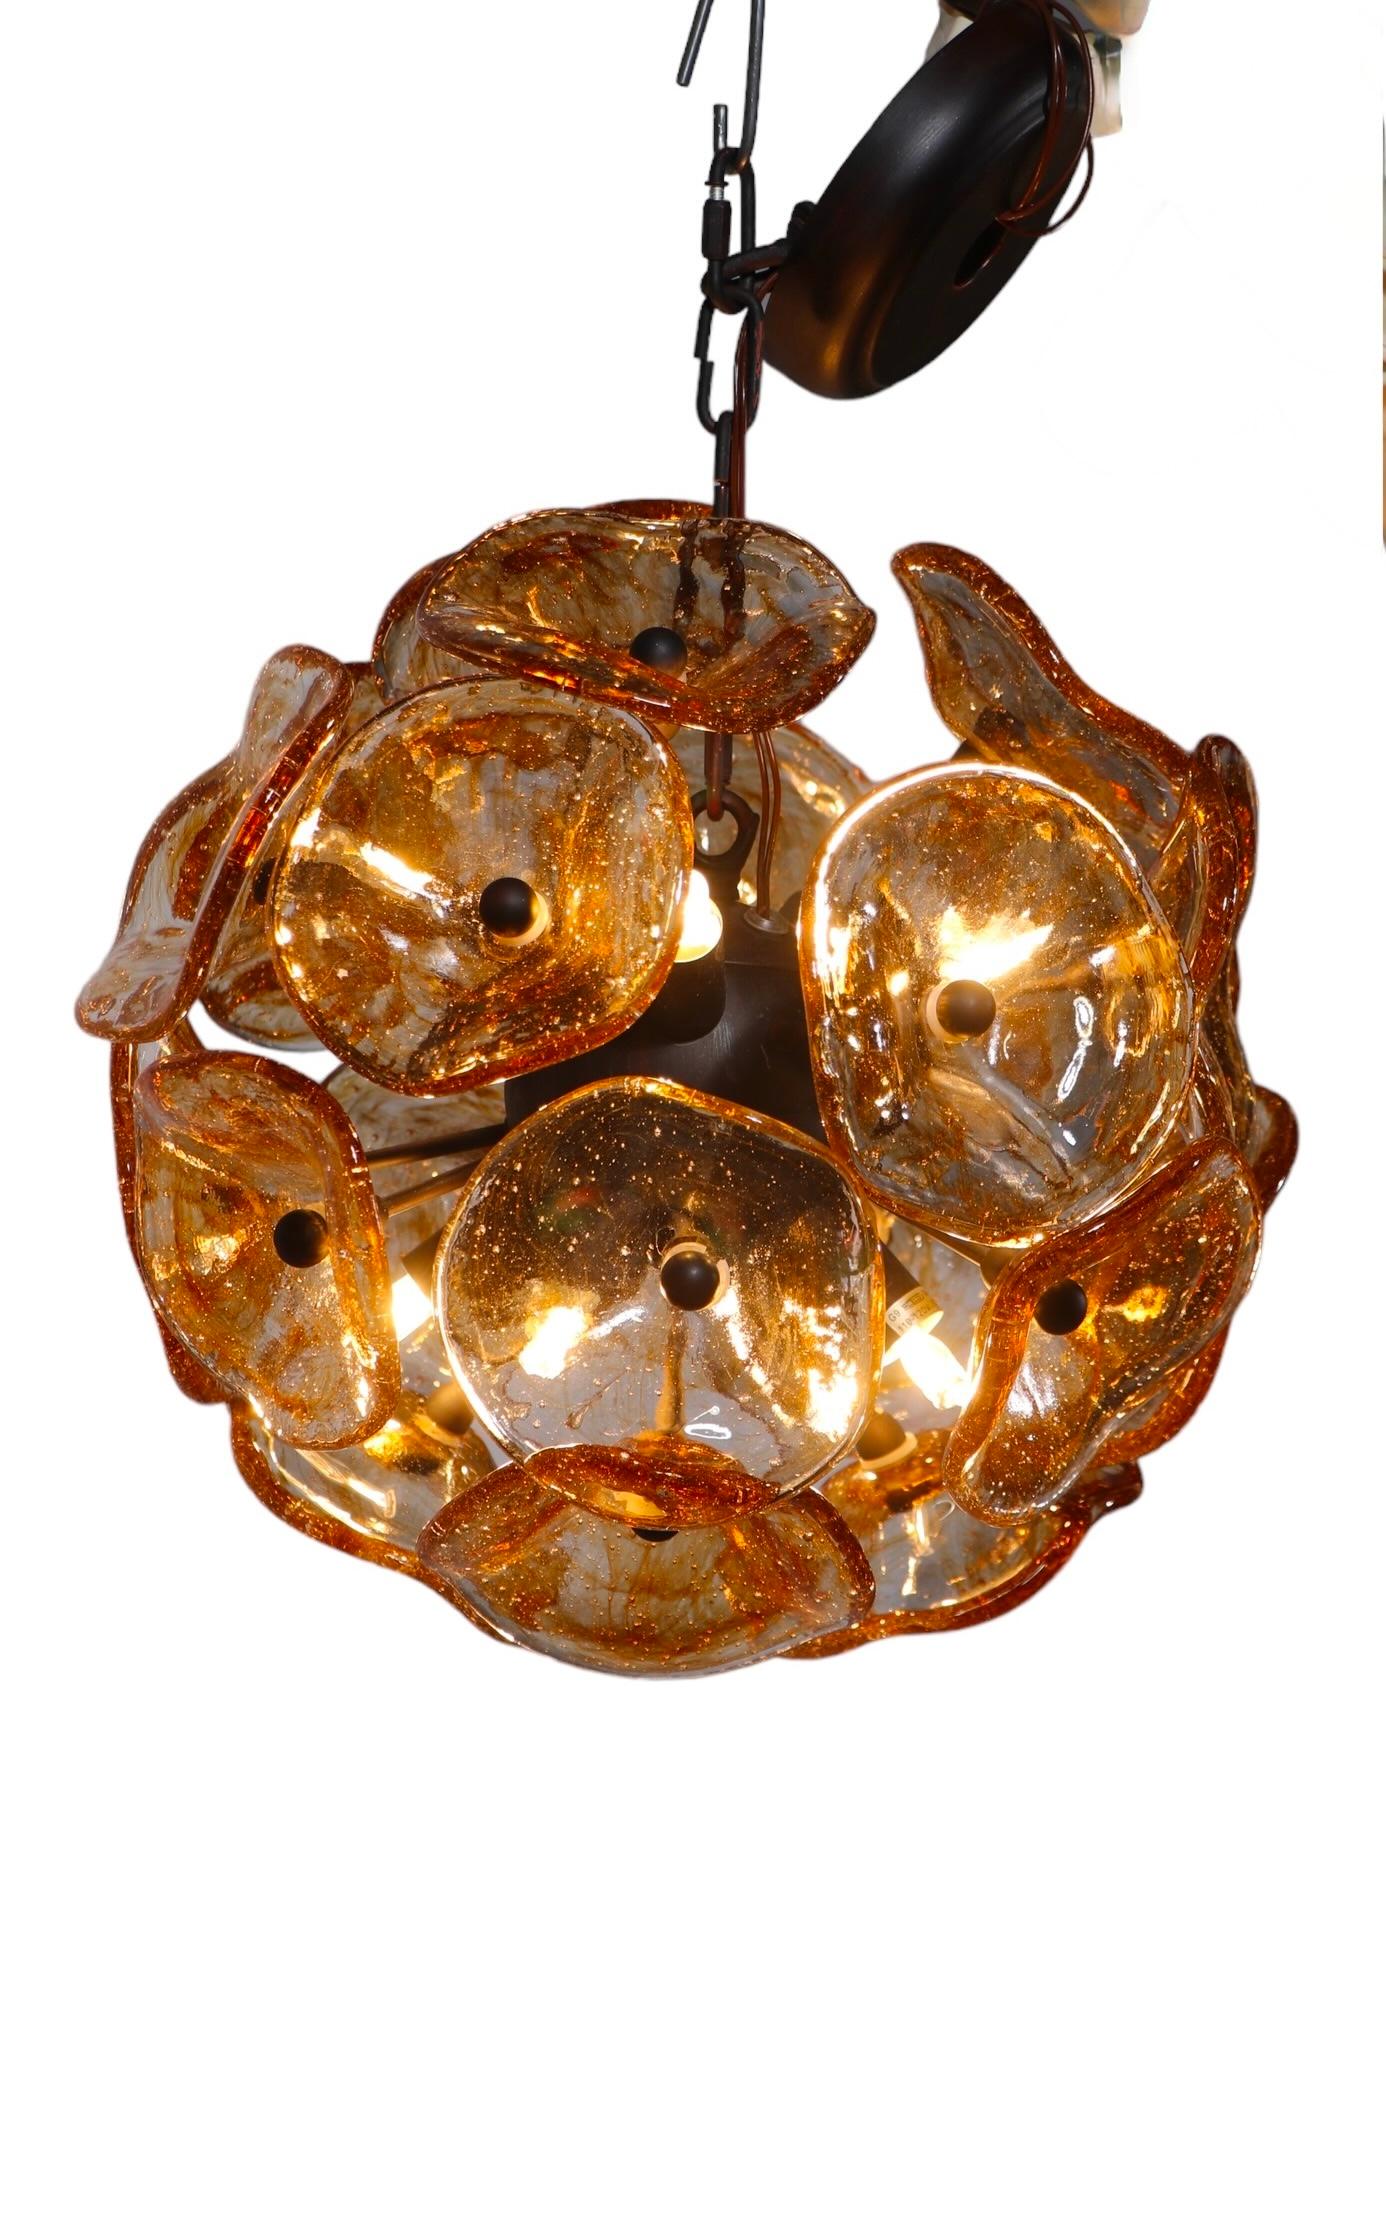 20th Century Post Modern Chandelier with Murano Glass Flowers by Fiori c 1990 -2010 For Sale